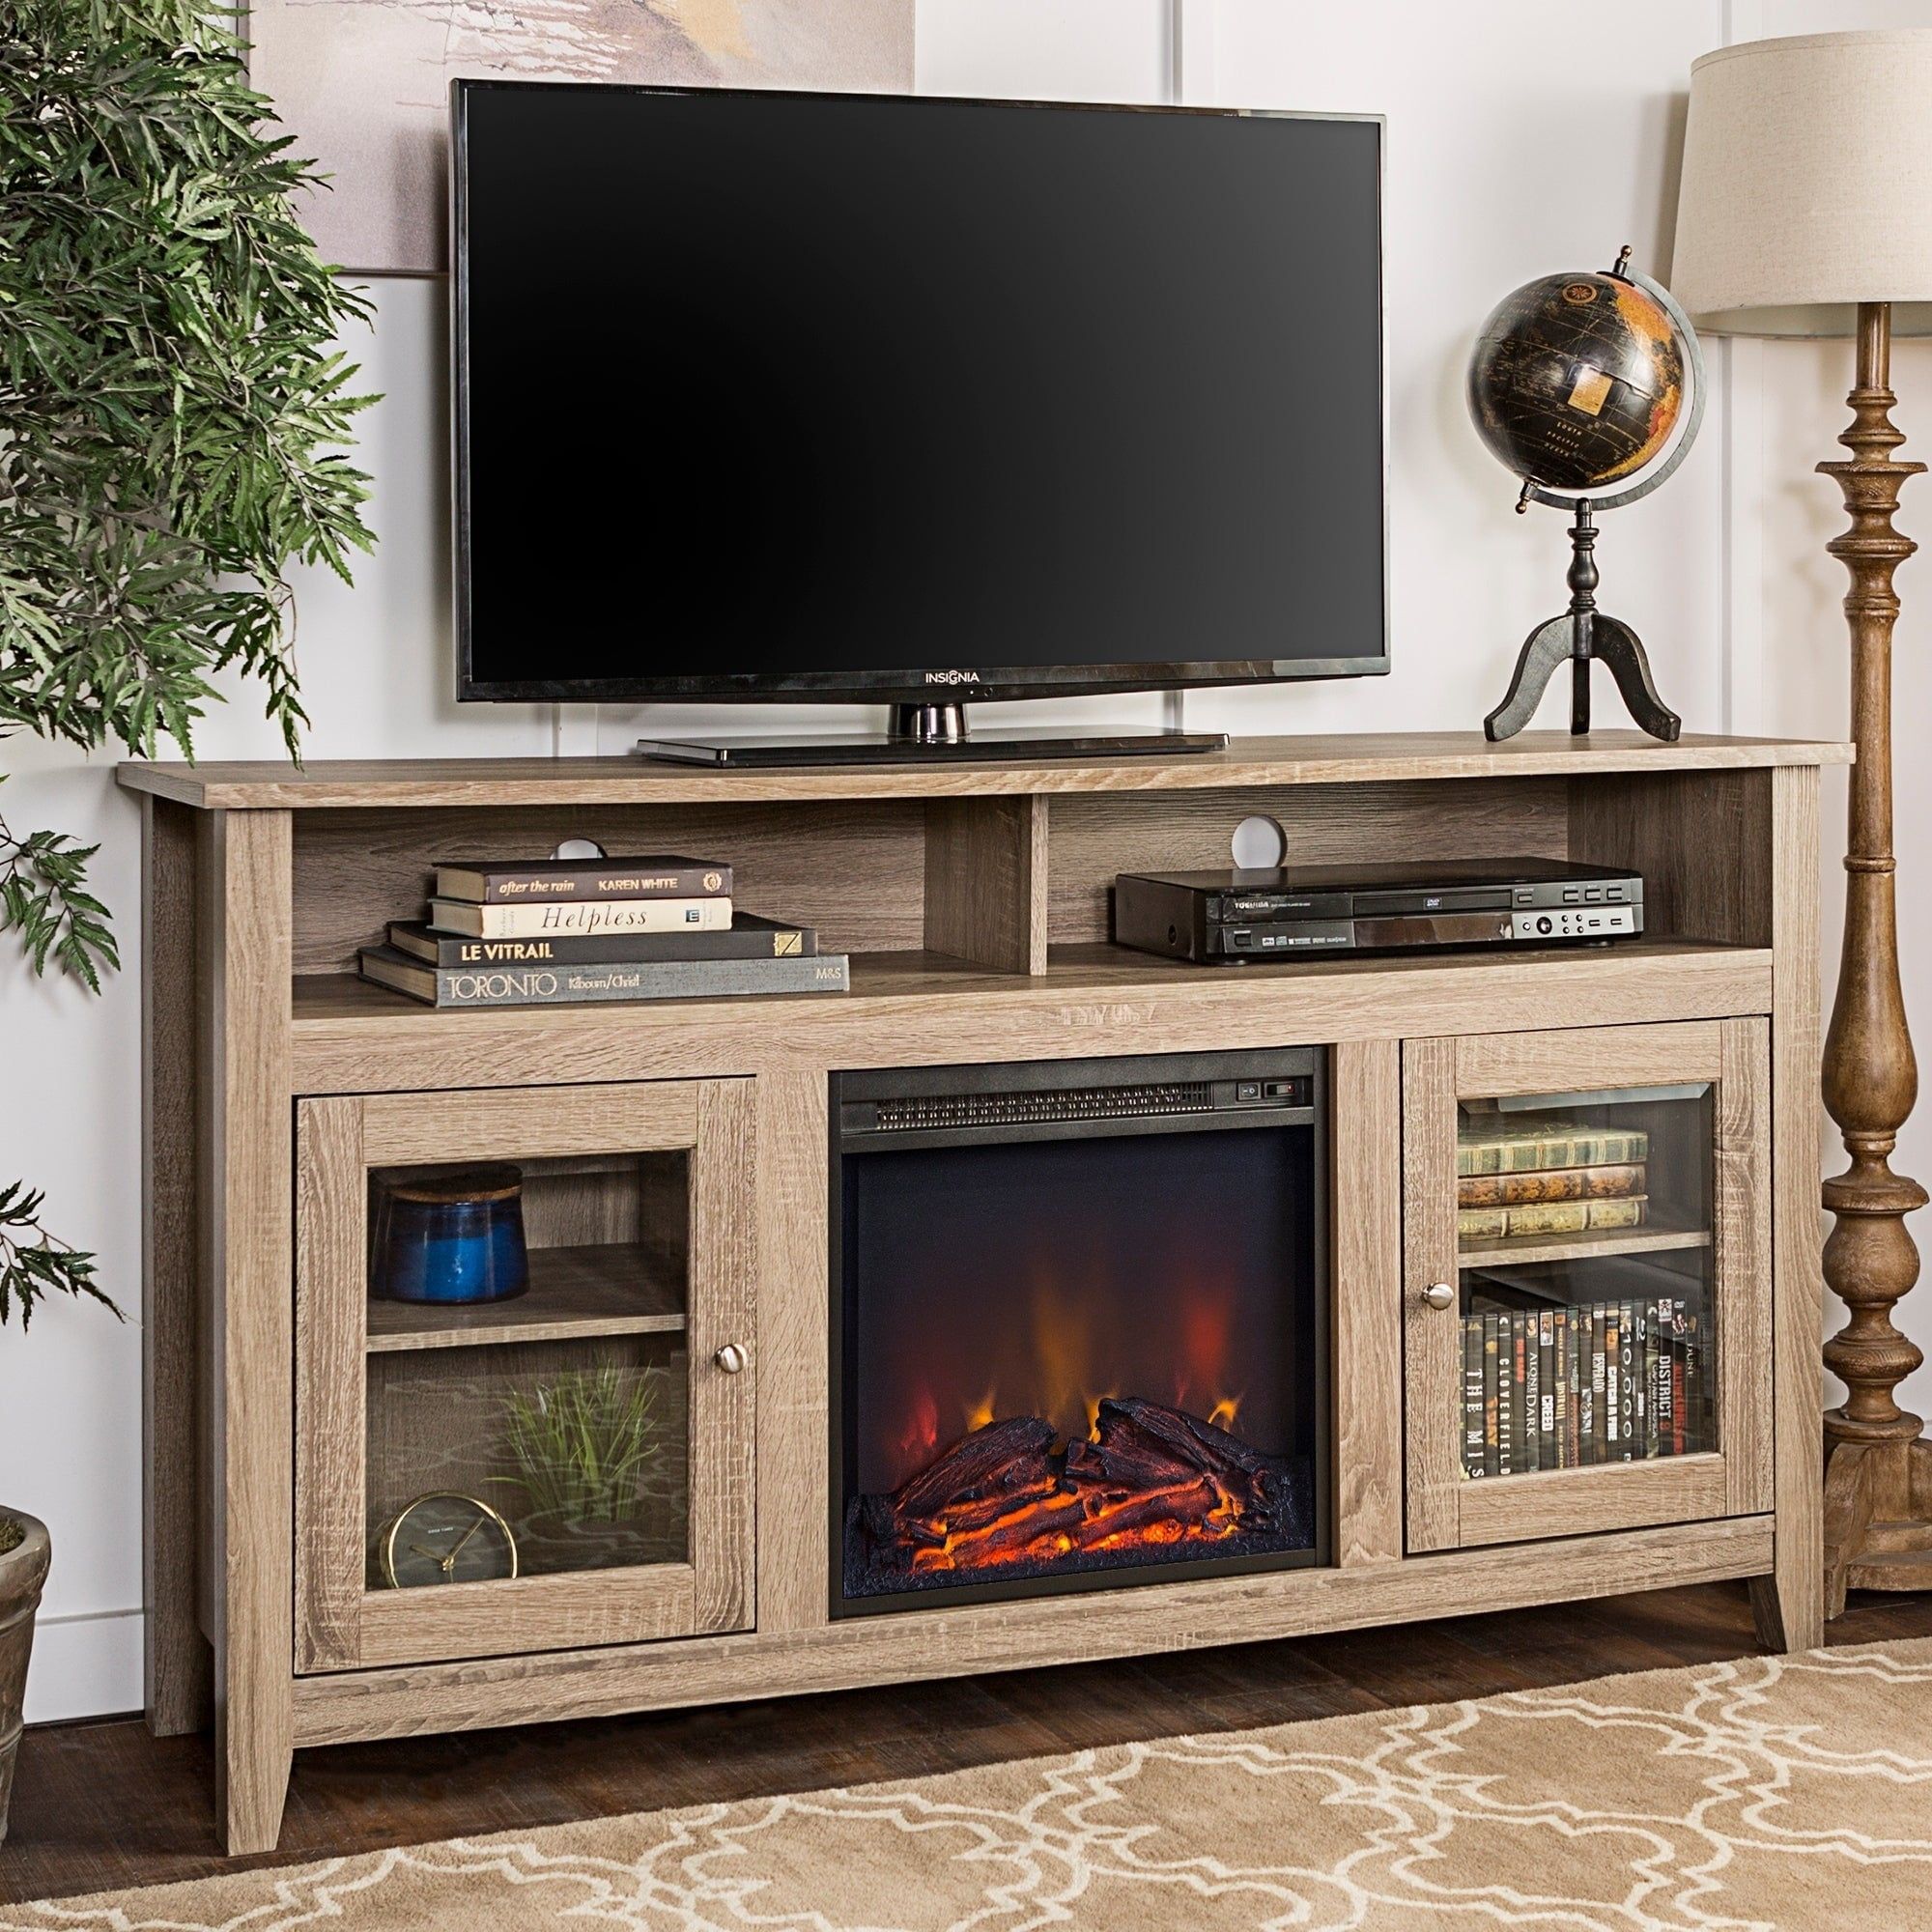 Middlebrook Designs 58 Inch Driftwood Highboy Fireplace Tv Stand Intended For Wood Highboy Fireplace Tv Stands (Gallery 1 of 20)